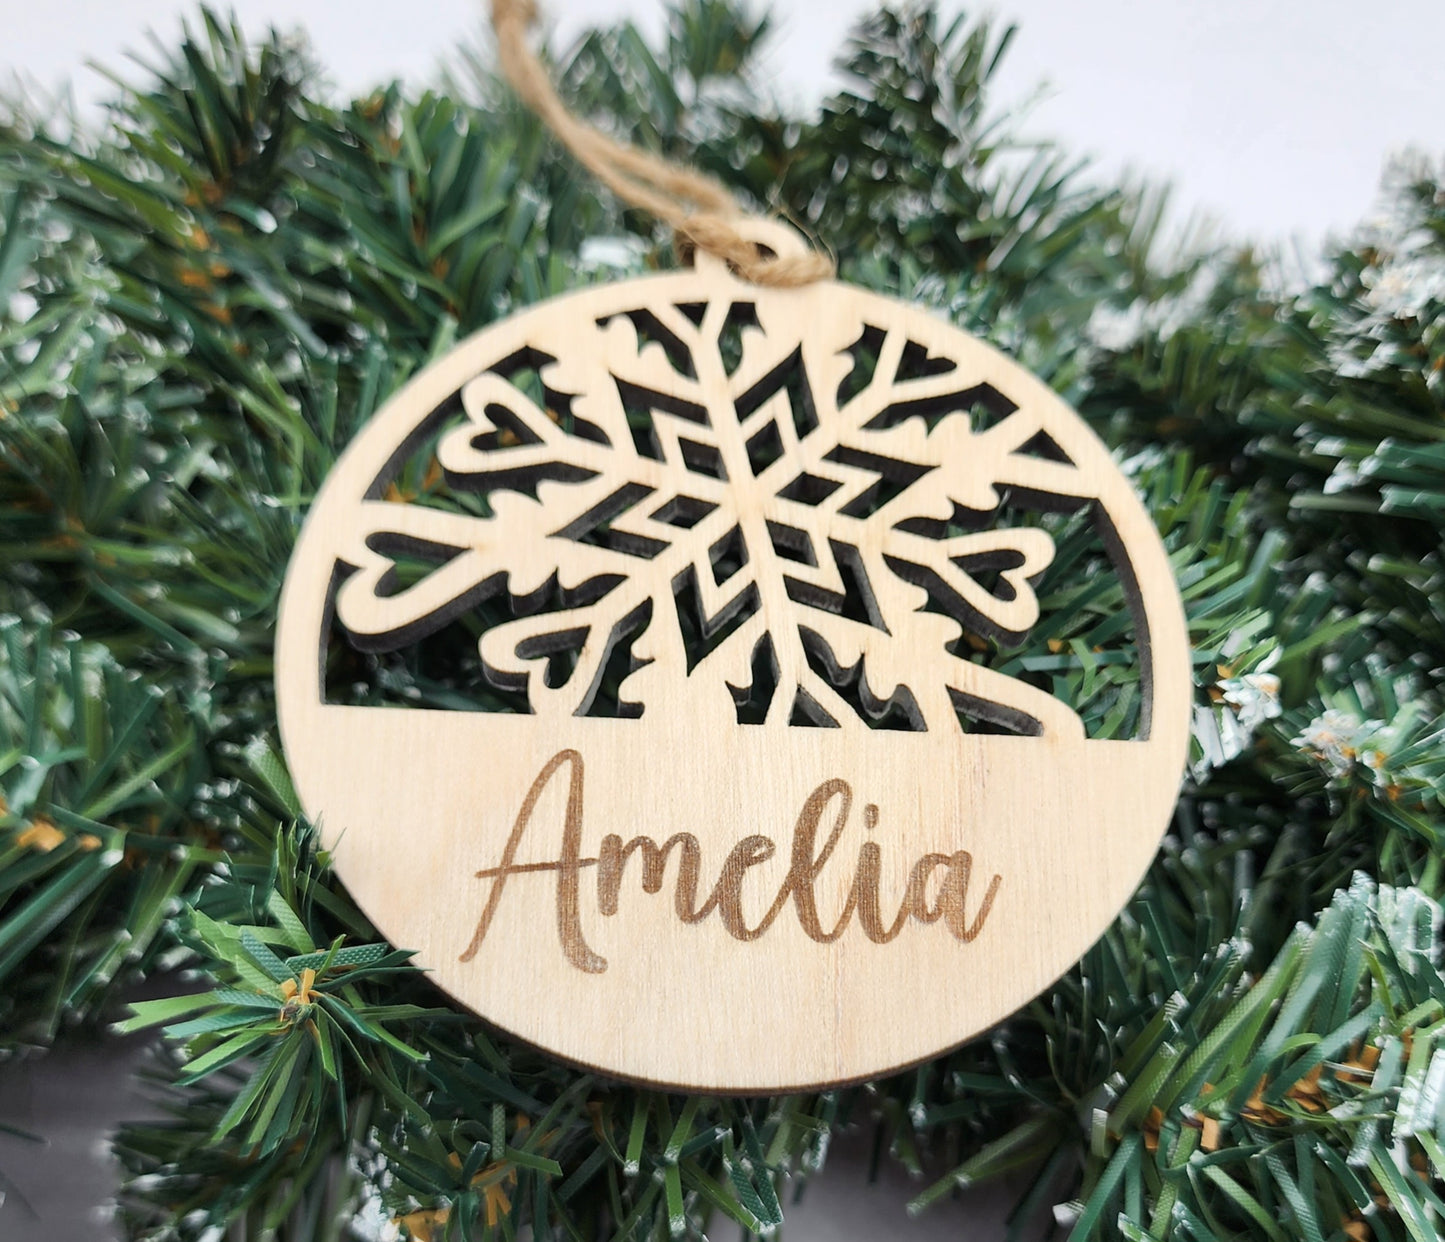 Ornament personalized with snowflake